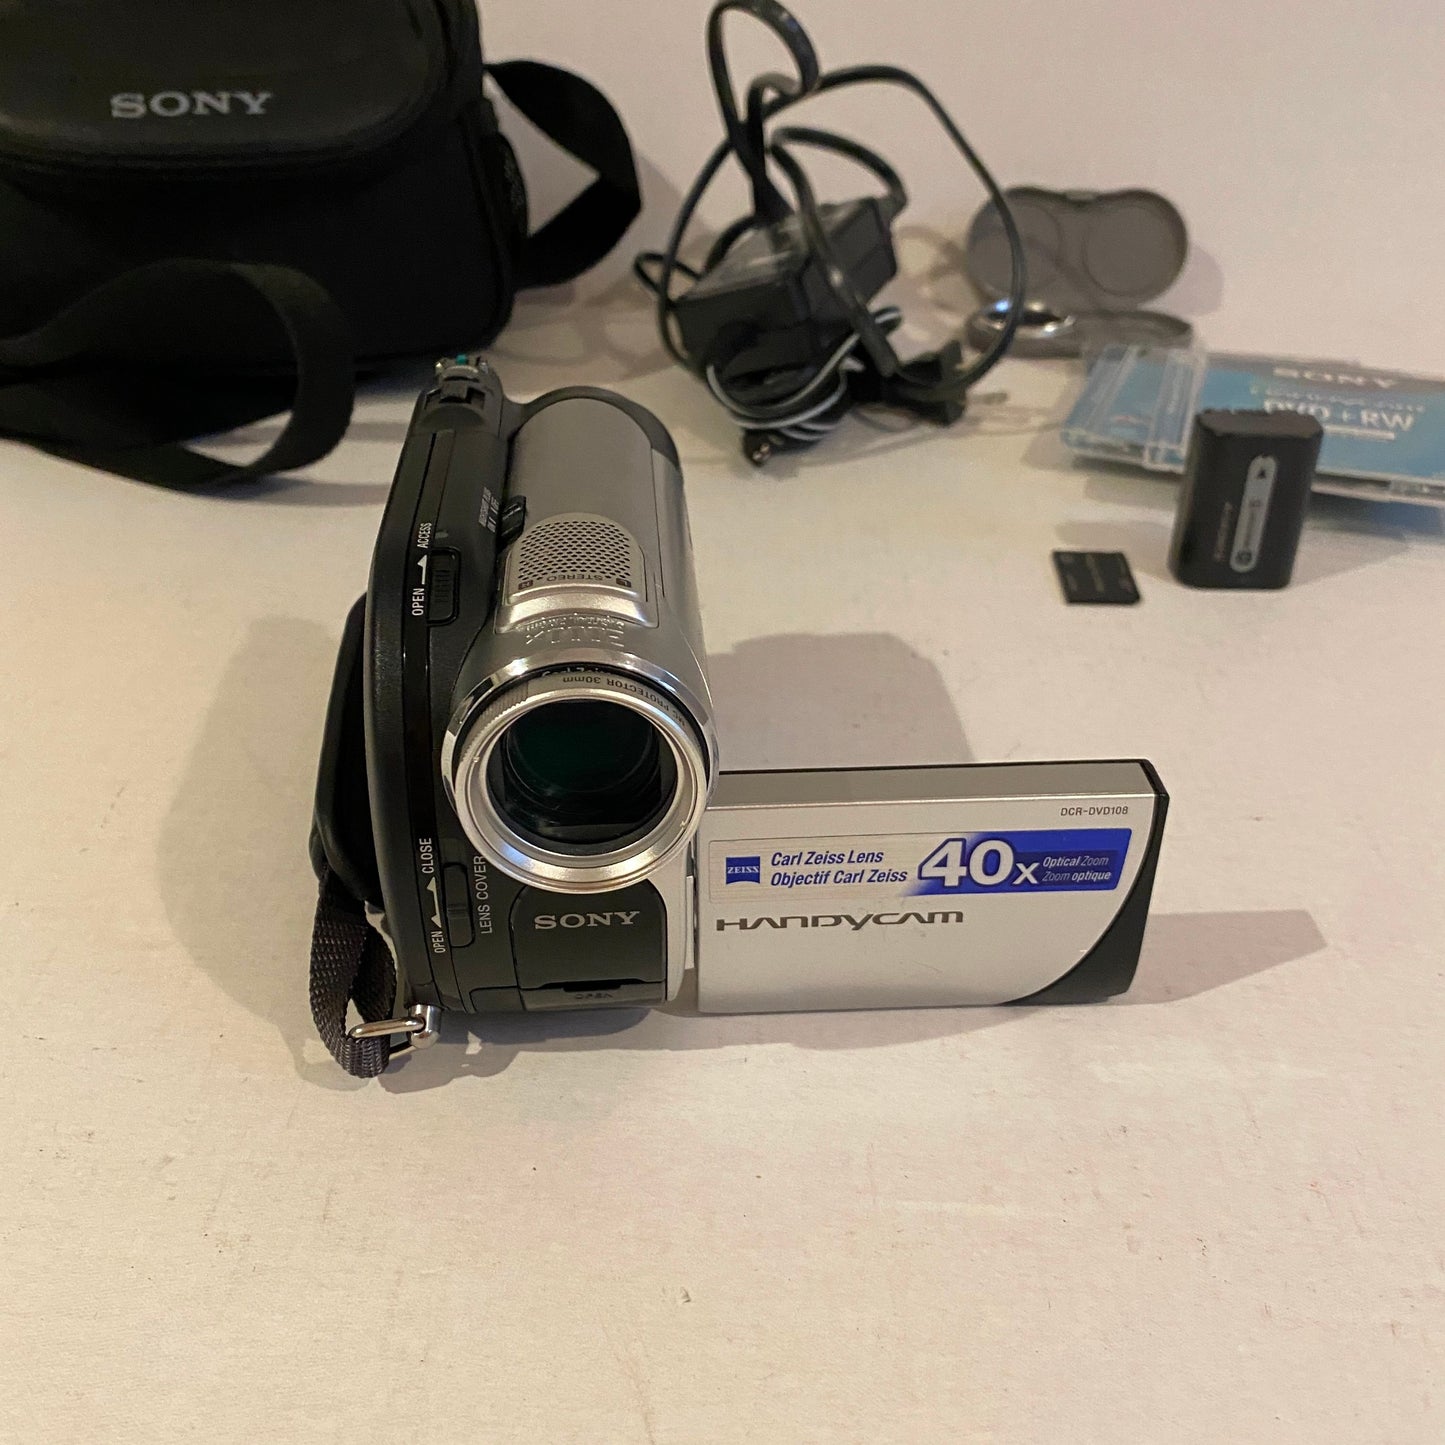 Sony DVD Handycam Camcorder with 40x Optical Zoom - DCR-DVD108